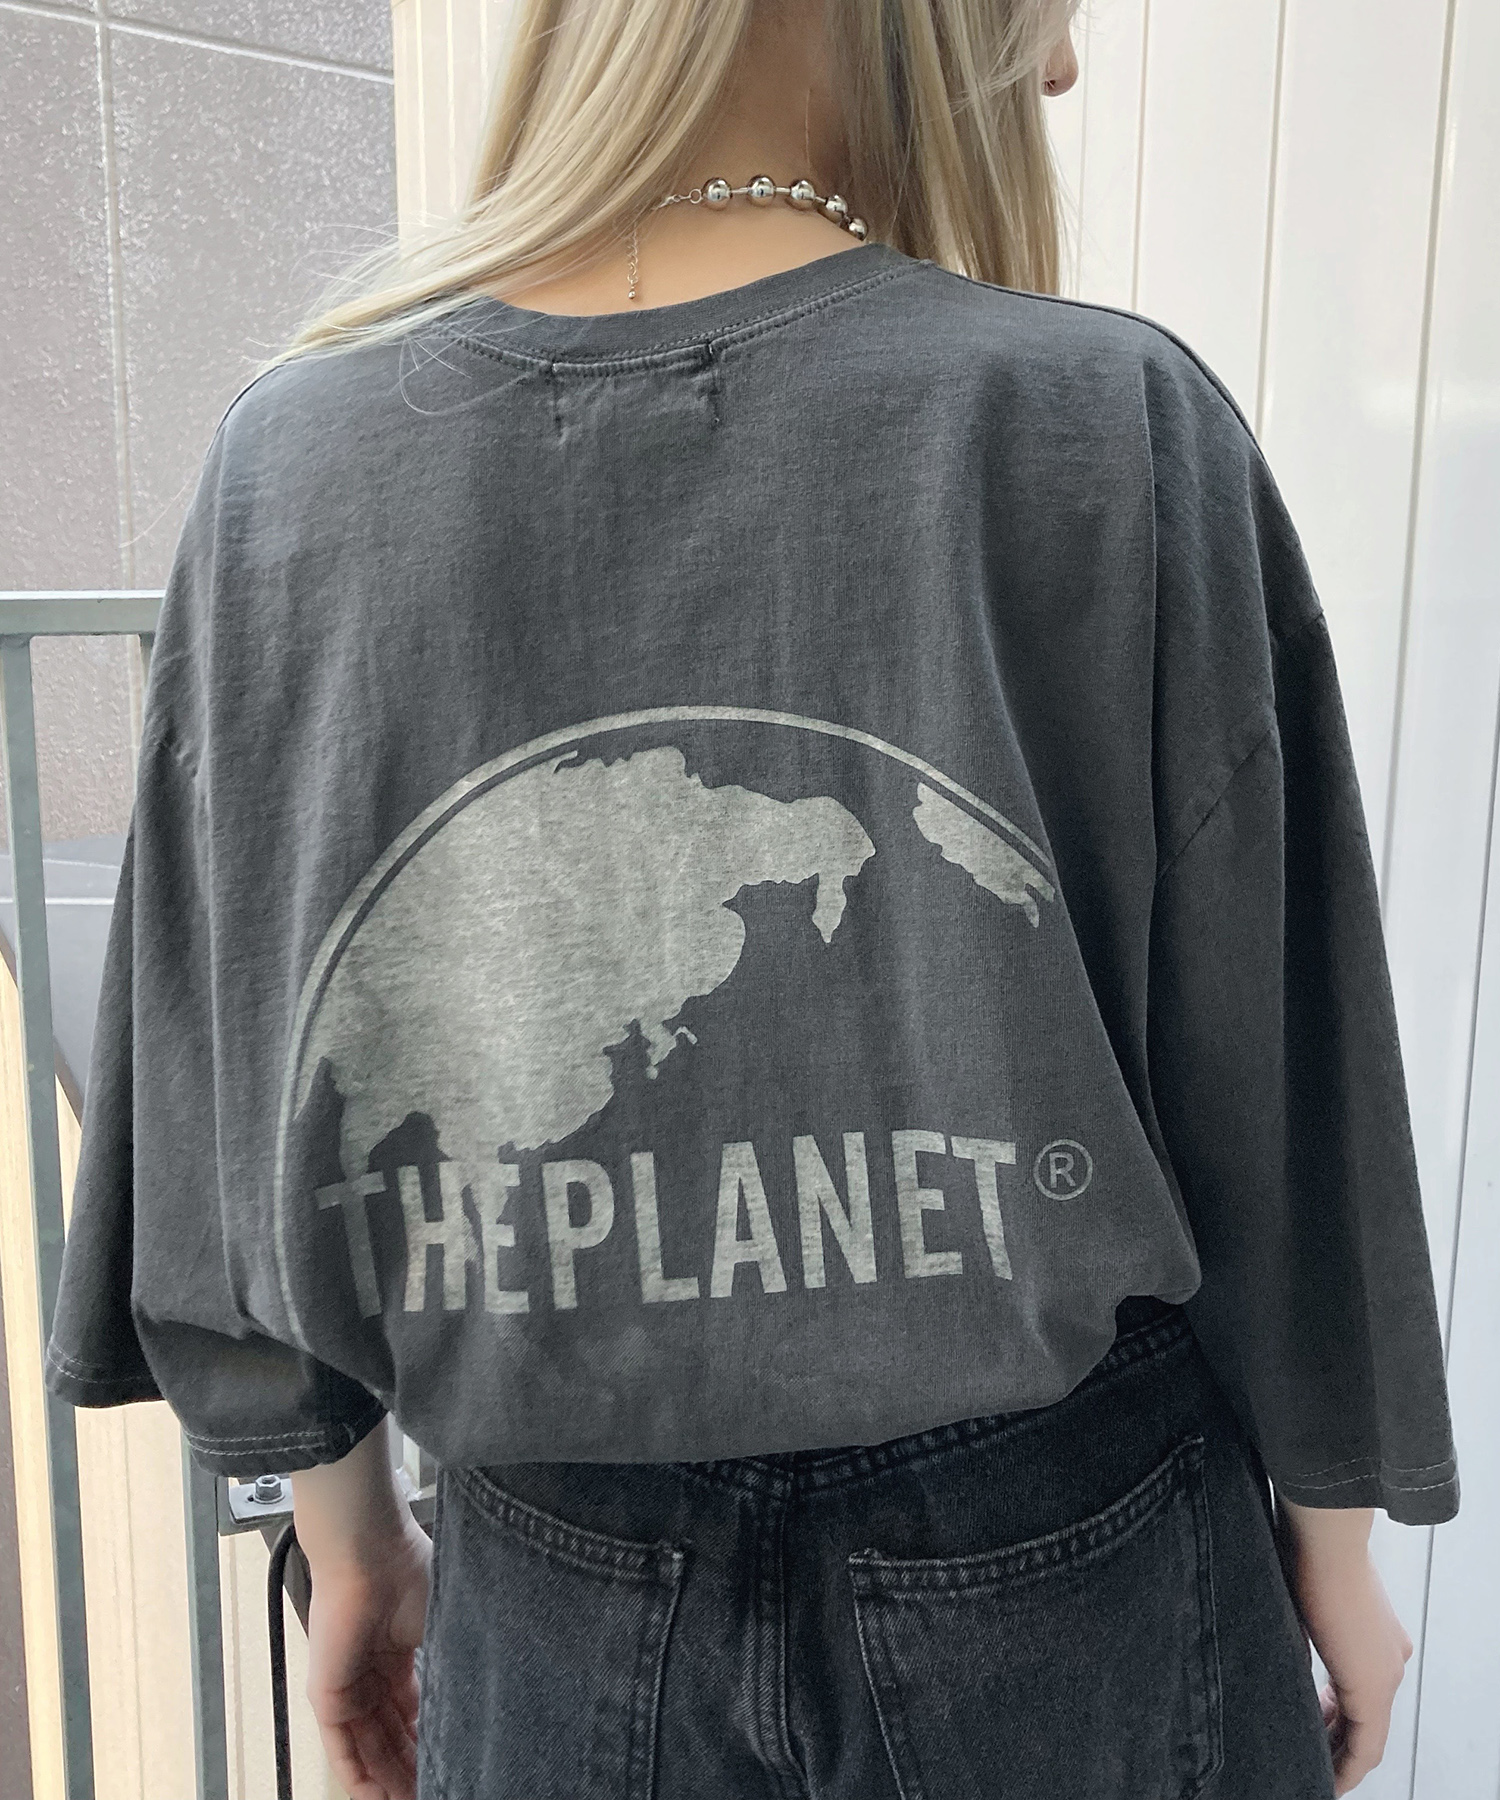 PARTY ON THE PLANETレディース トップス ネックレス付 Tシャツ | www